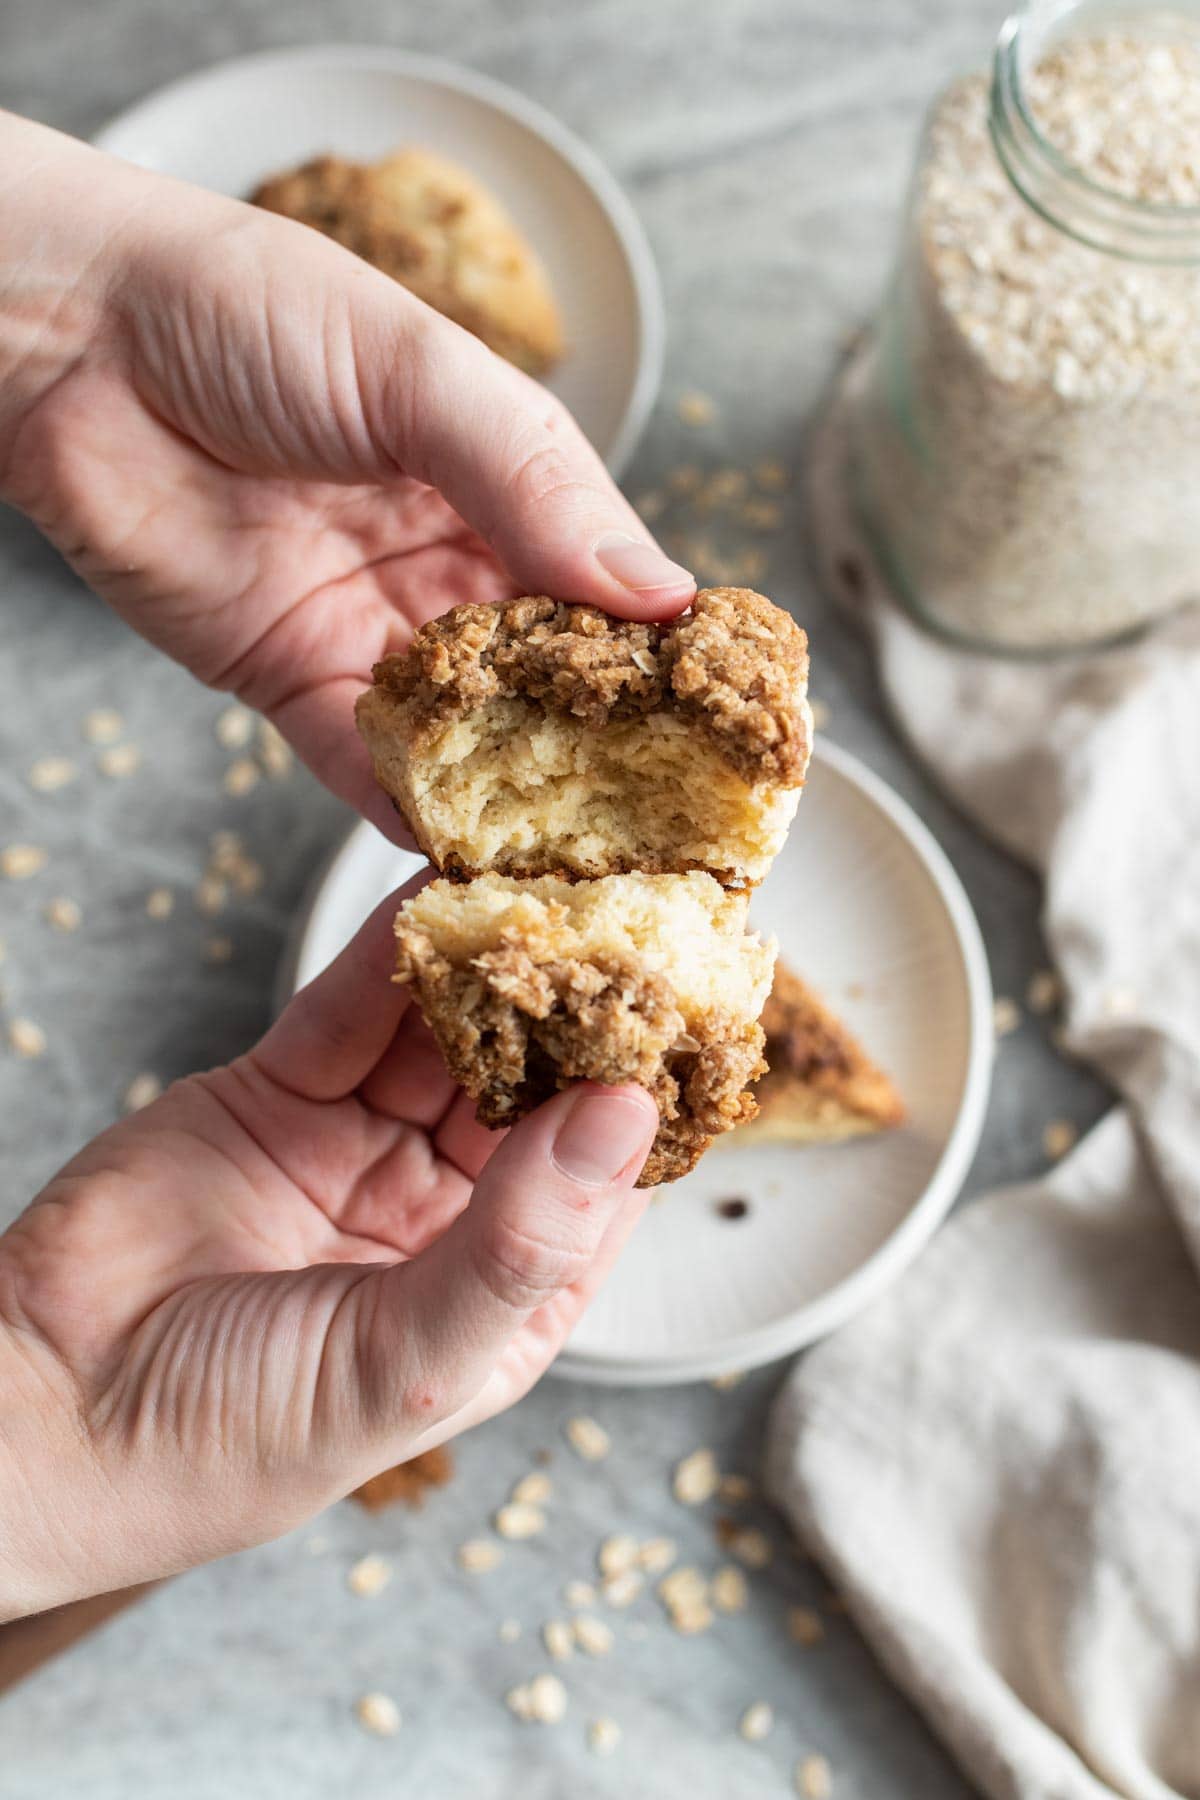 Hands breaking apart a scone with cinnamon crust.